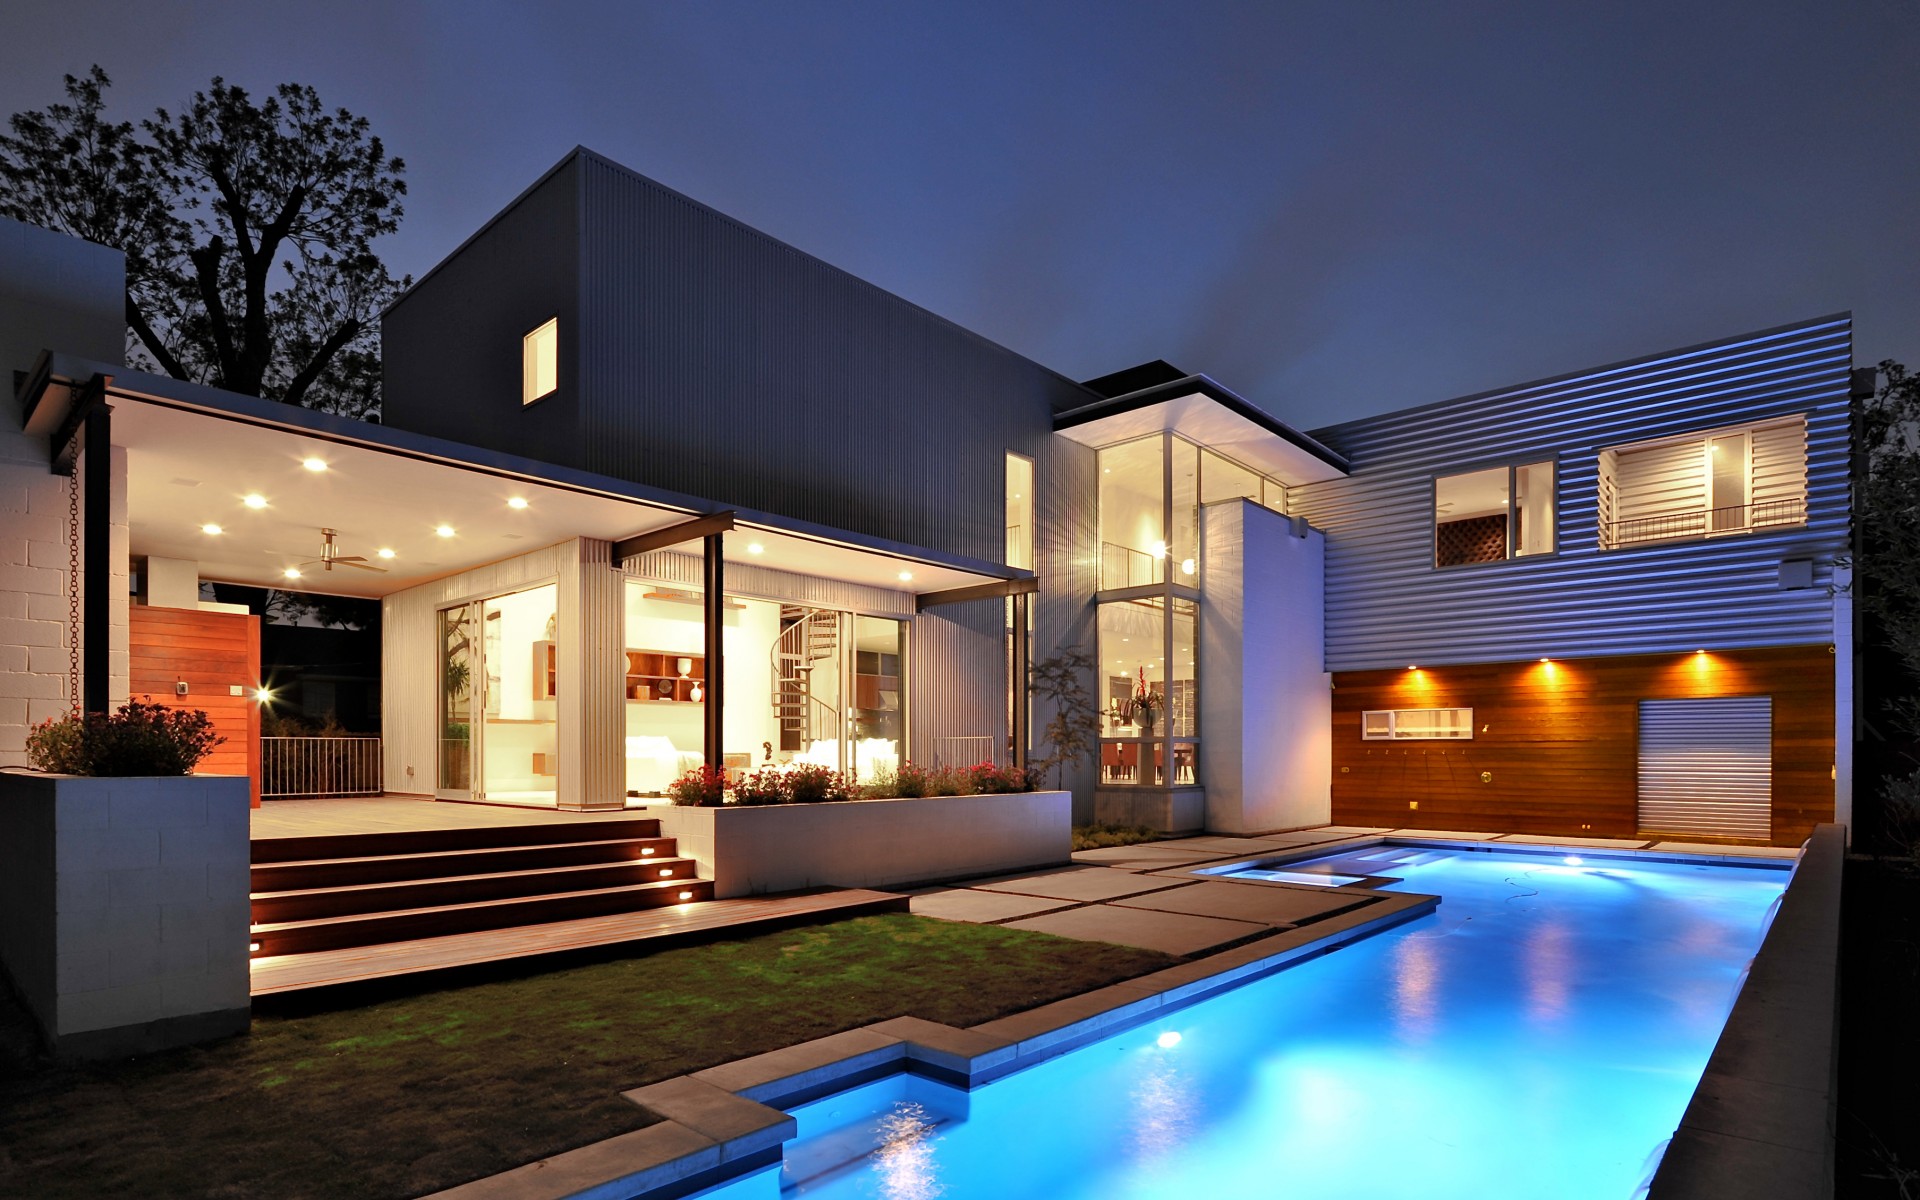 Dream House Simple With Pool - 1920x1200 Wallpaper 